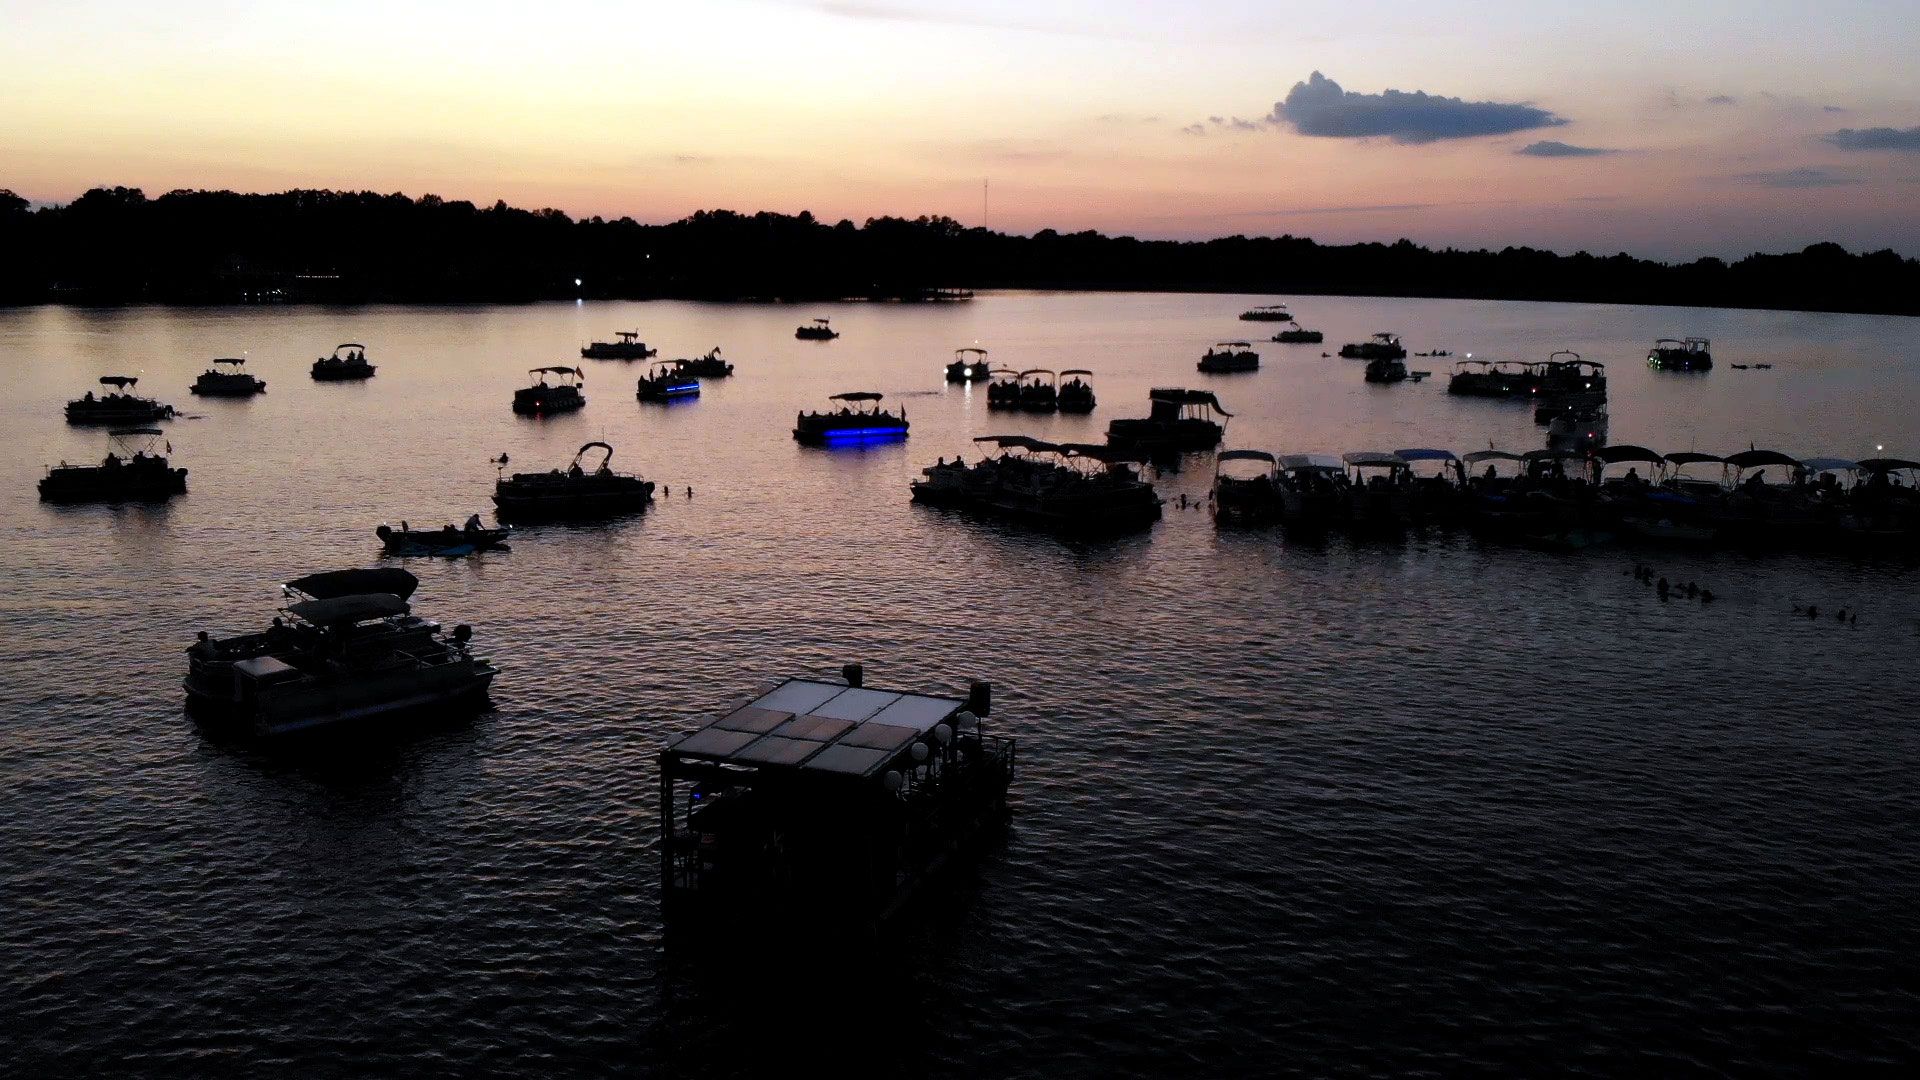 Boats at Sunset watching the concert on Garner Lake